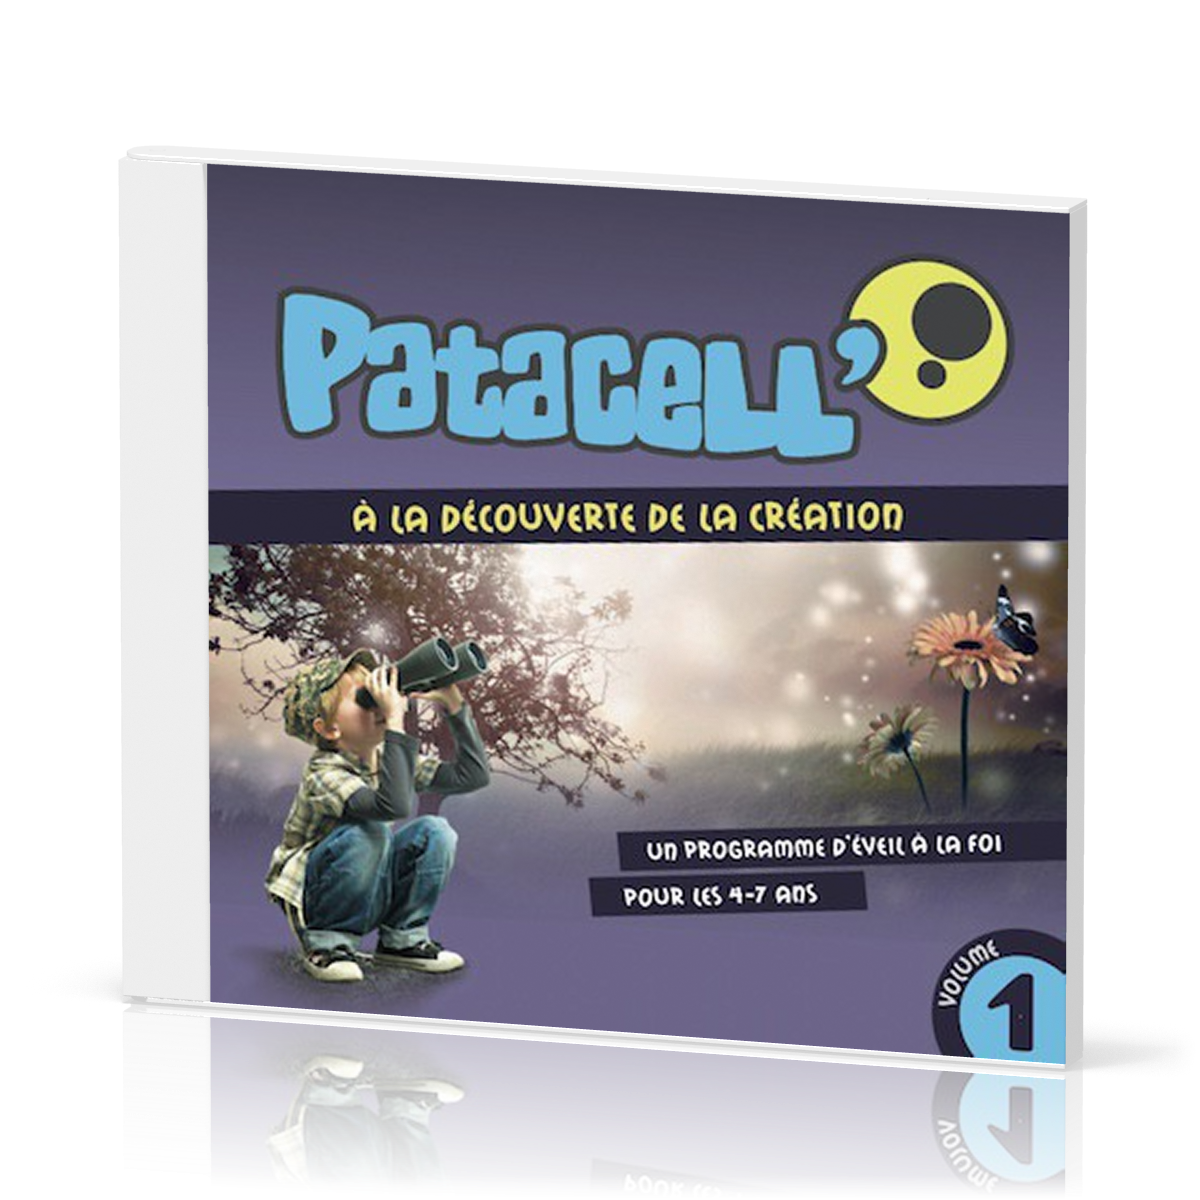 Patacell' - vol.1 [CD, 2016]